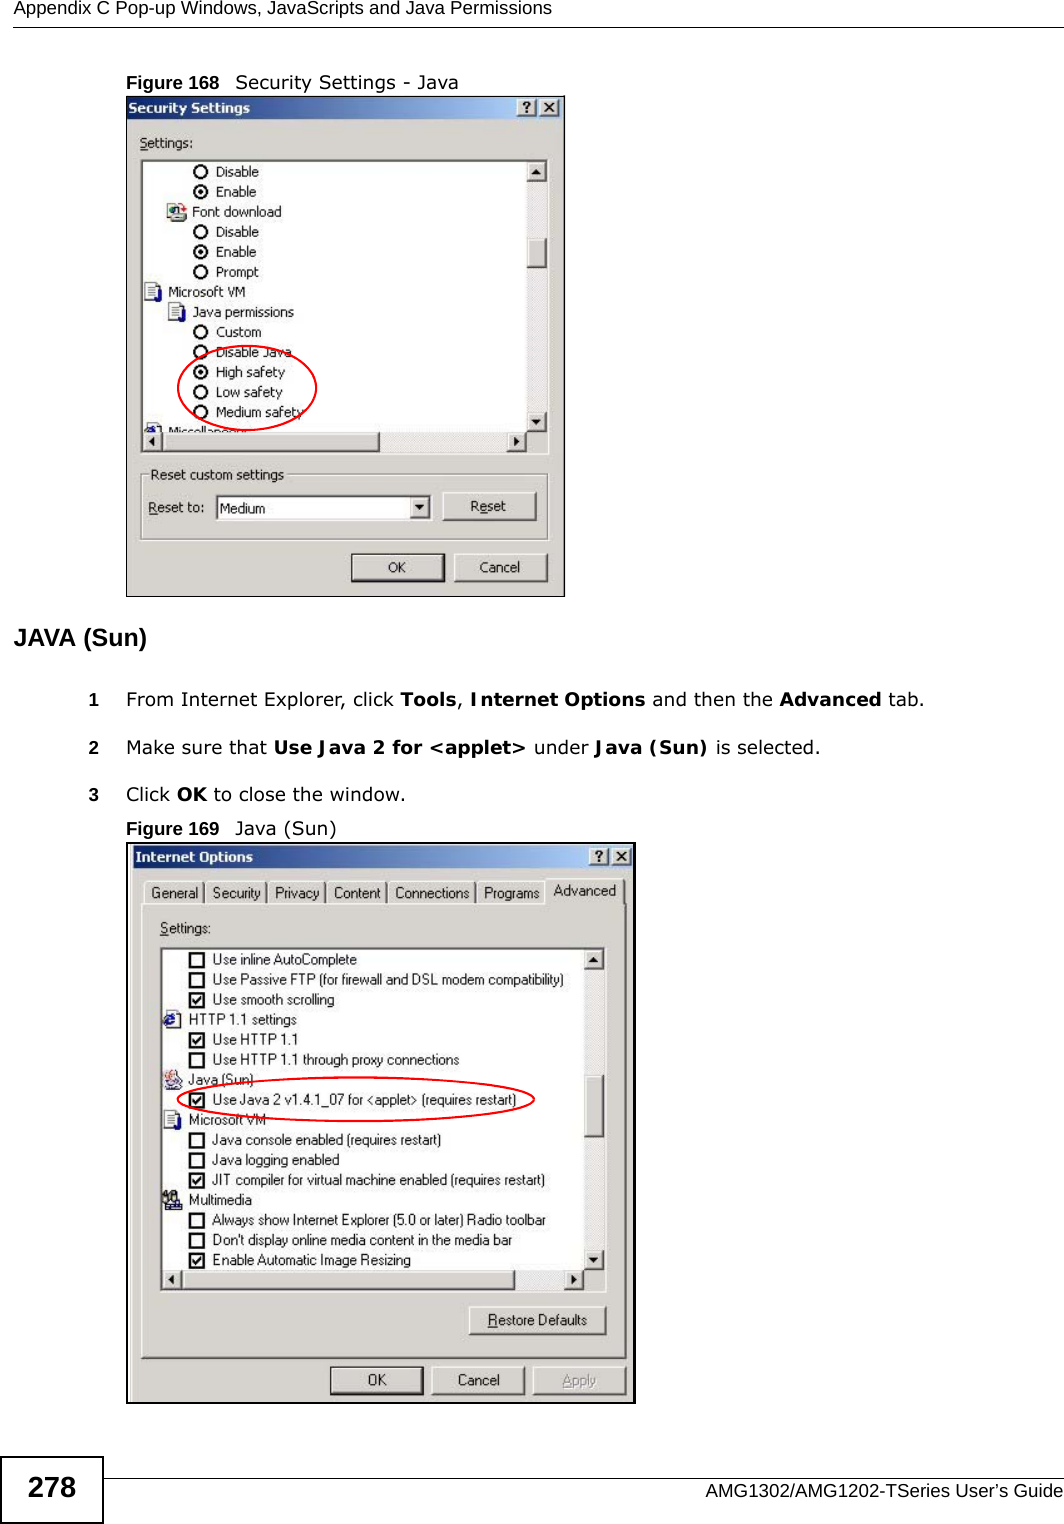 Appendix C Pop-up Windows, JavaScripts and Java PermissionsAMG1302/AMG1202-TSeries User’s Guide278Figure 168   Security Settings - Java JAVA (Sun)1From Internet Explorer, click Tools, Internet Options and then the Advanced tab. 2Make sure that Use Java 2 for &lt;applet&gt; under Java (Sun) is selected.3Click OK to close the window.Figure 169   Java (Sun)